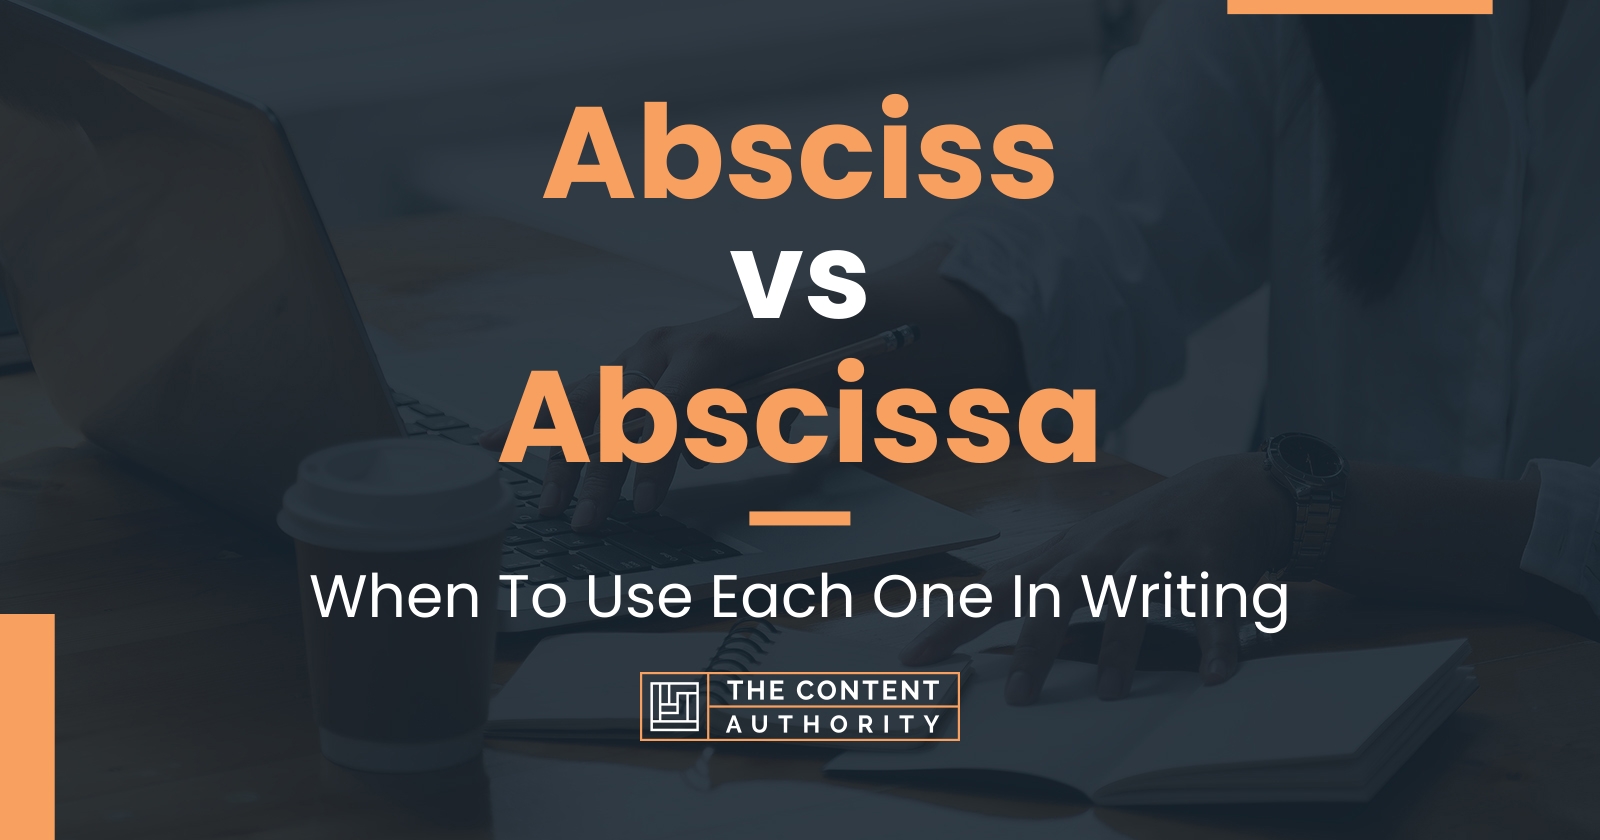 Absciss vs Abscissa: When To Use Each One In Writing